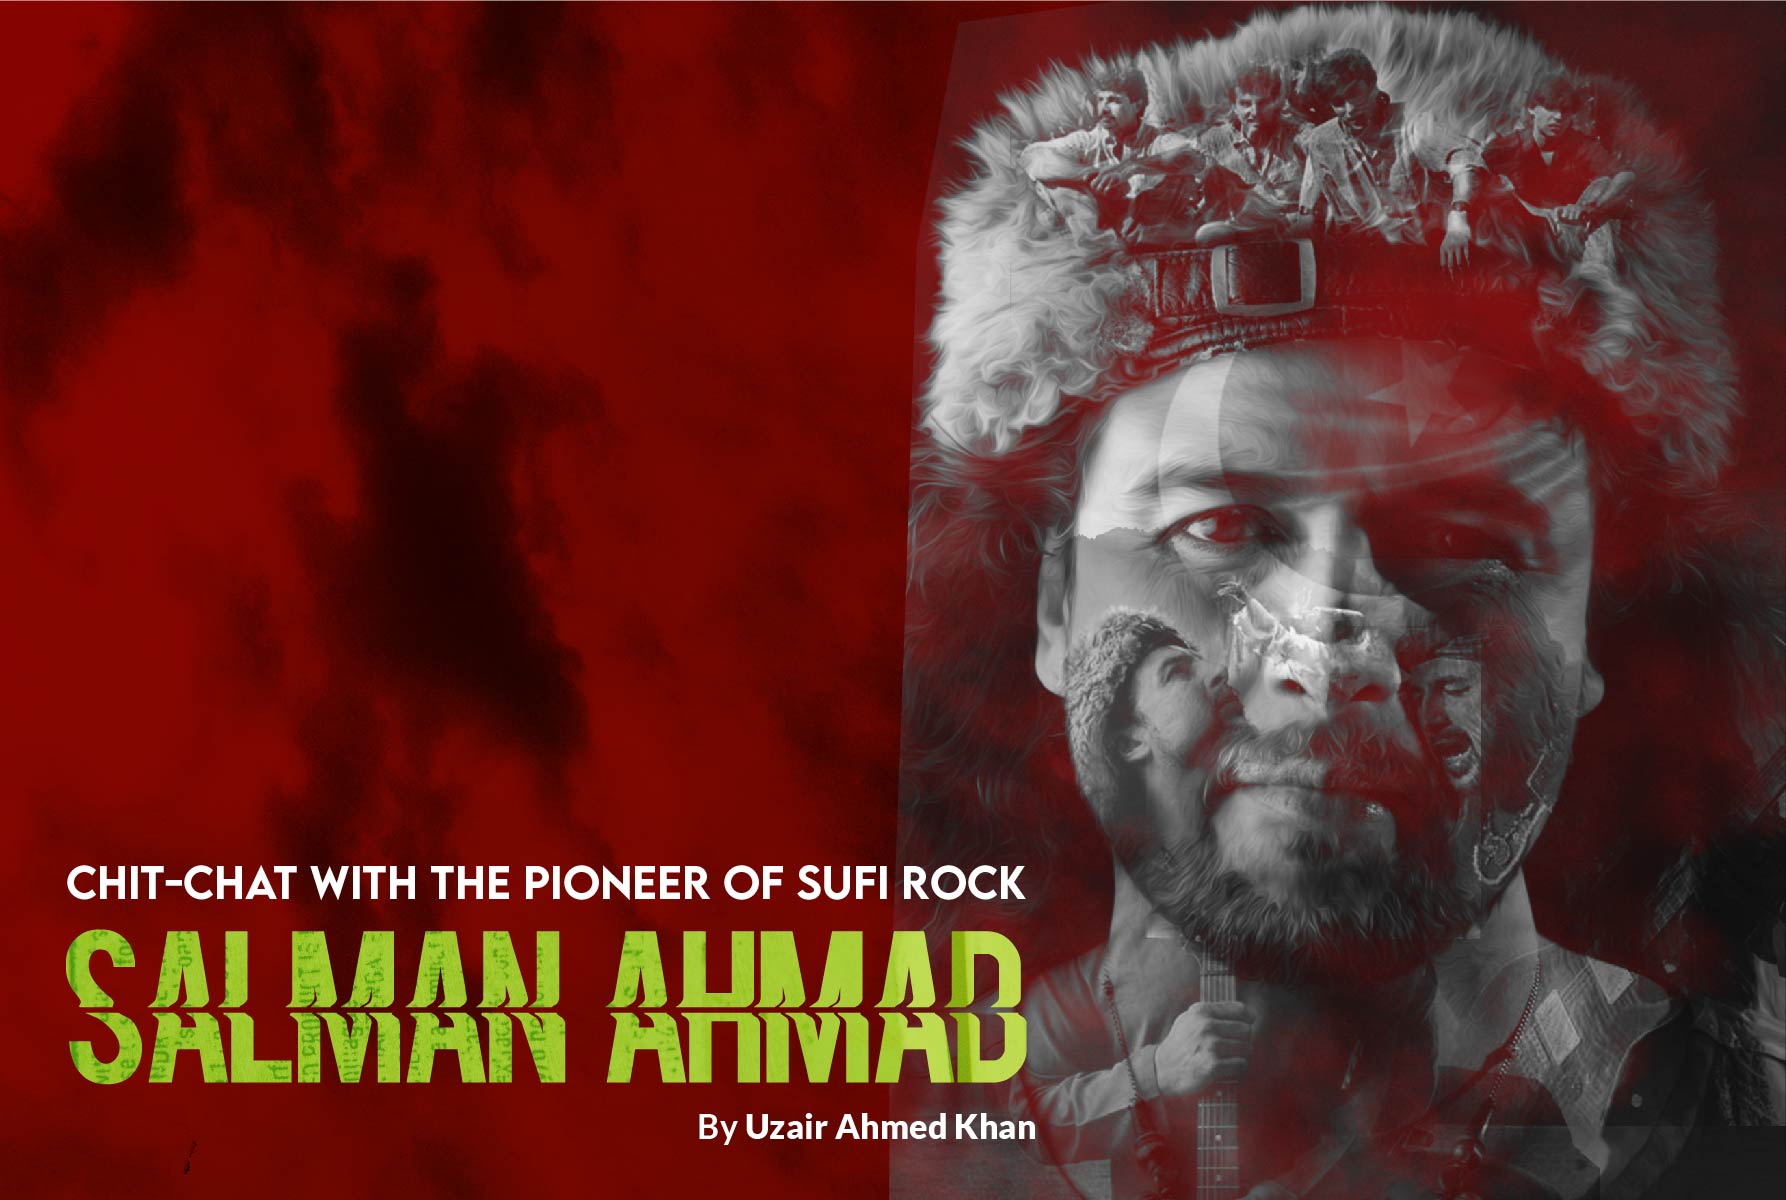 CHIT-CHAT WITH THE PIONEER OF SUFI ROCK - Salman Ahmad